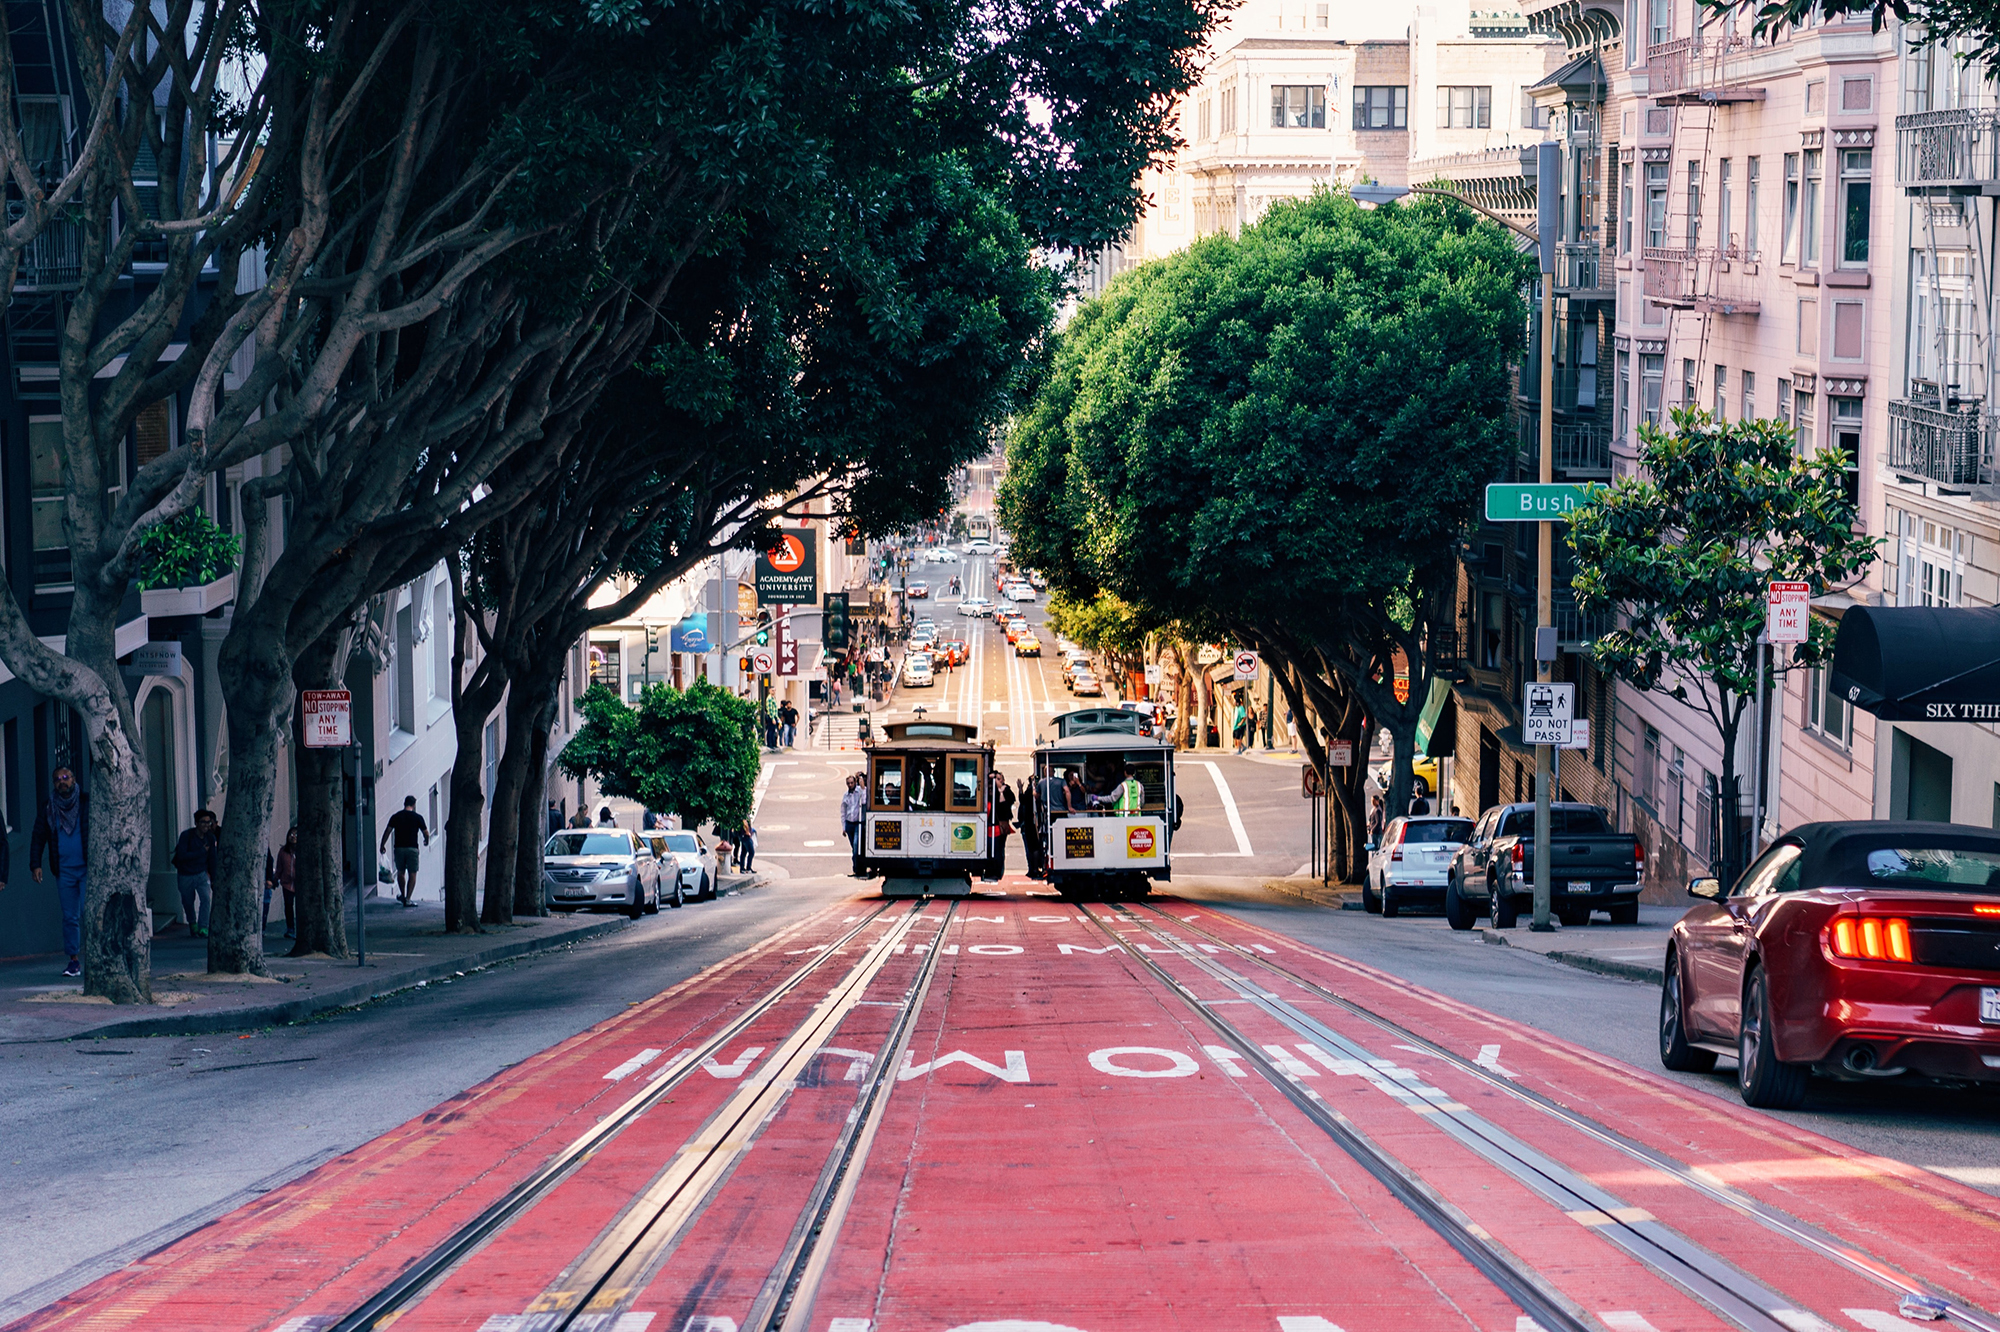 A view of two trolly cars traveling down a steep street in San Francisco